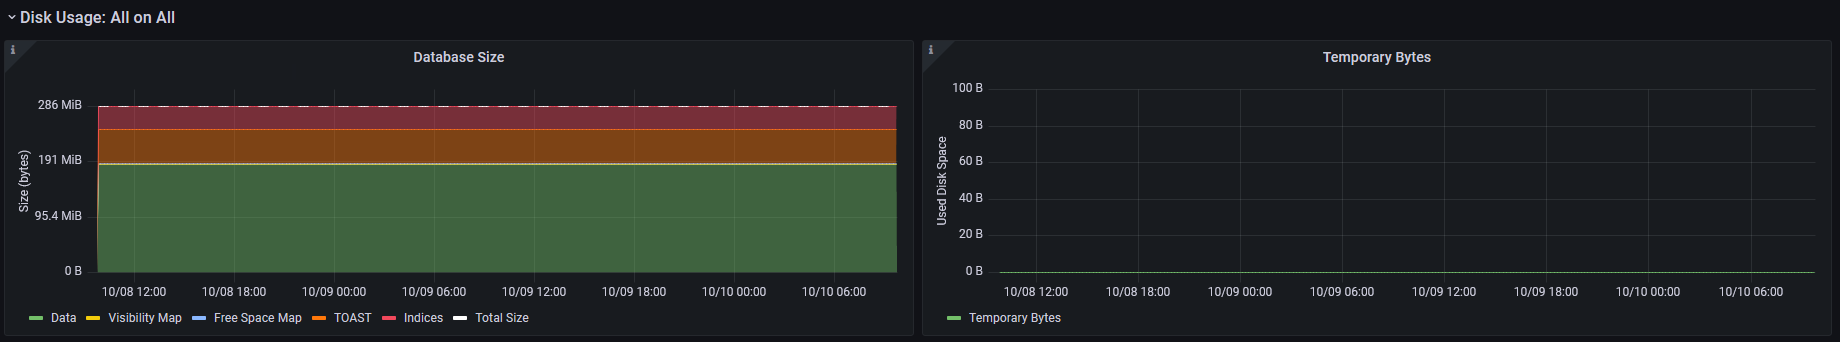 https://raw.githubusercontent.com/post-luxembourg/pgflux/v1.0.0.post1/docs/_images/grafana-dashboard-02.png